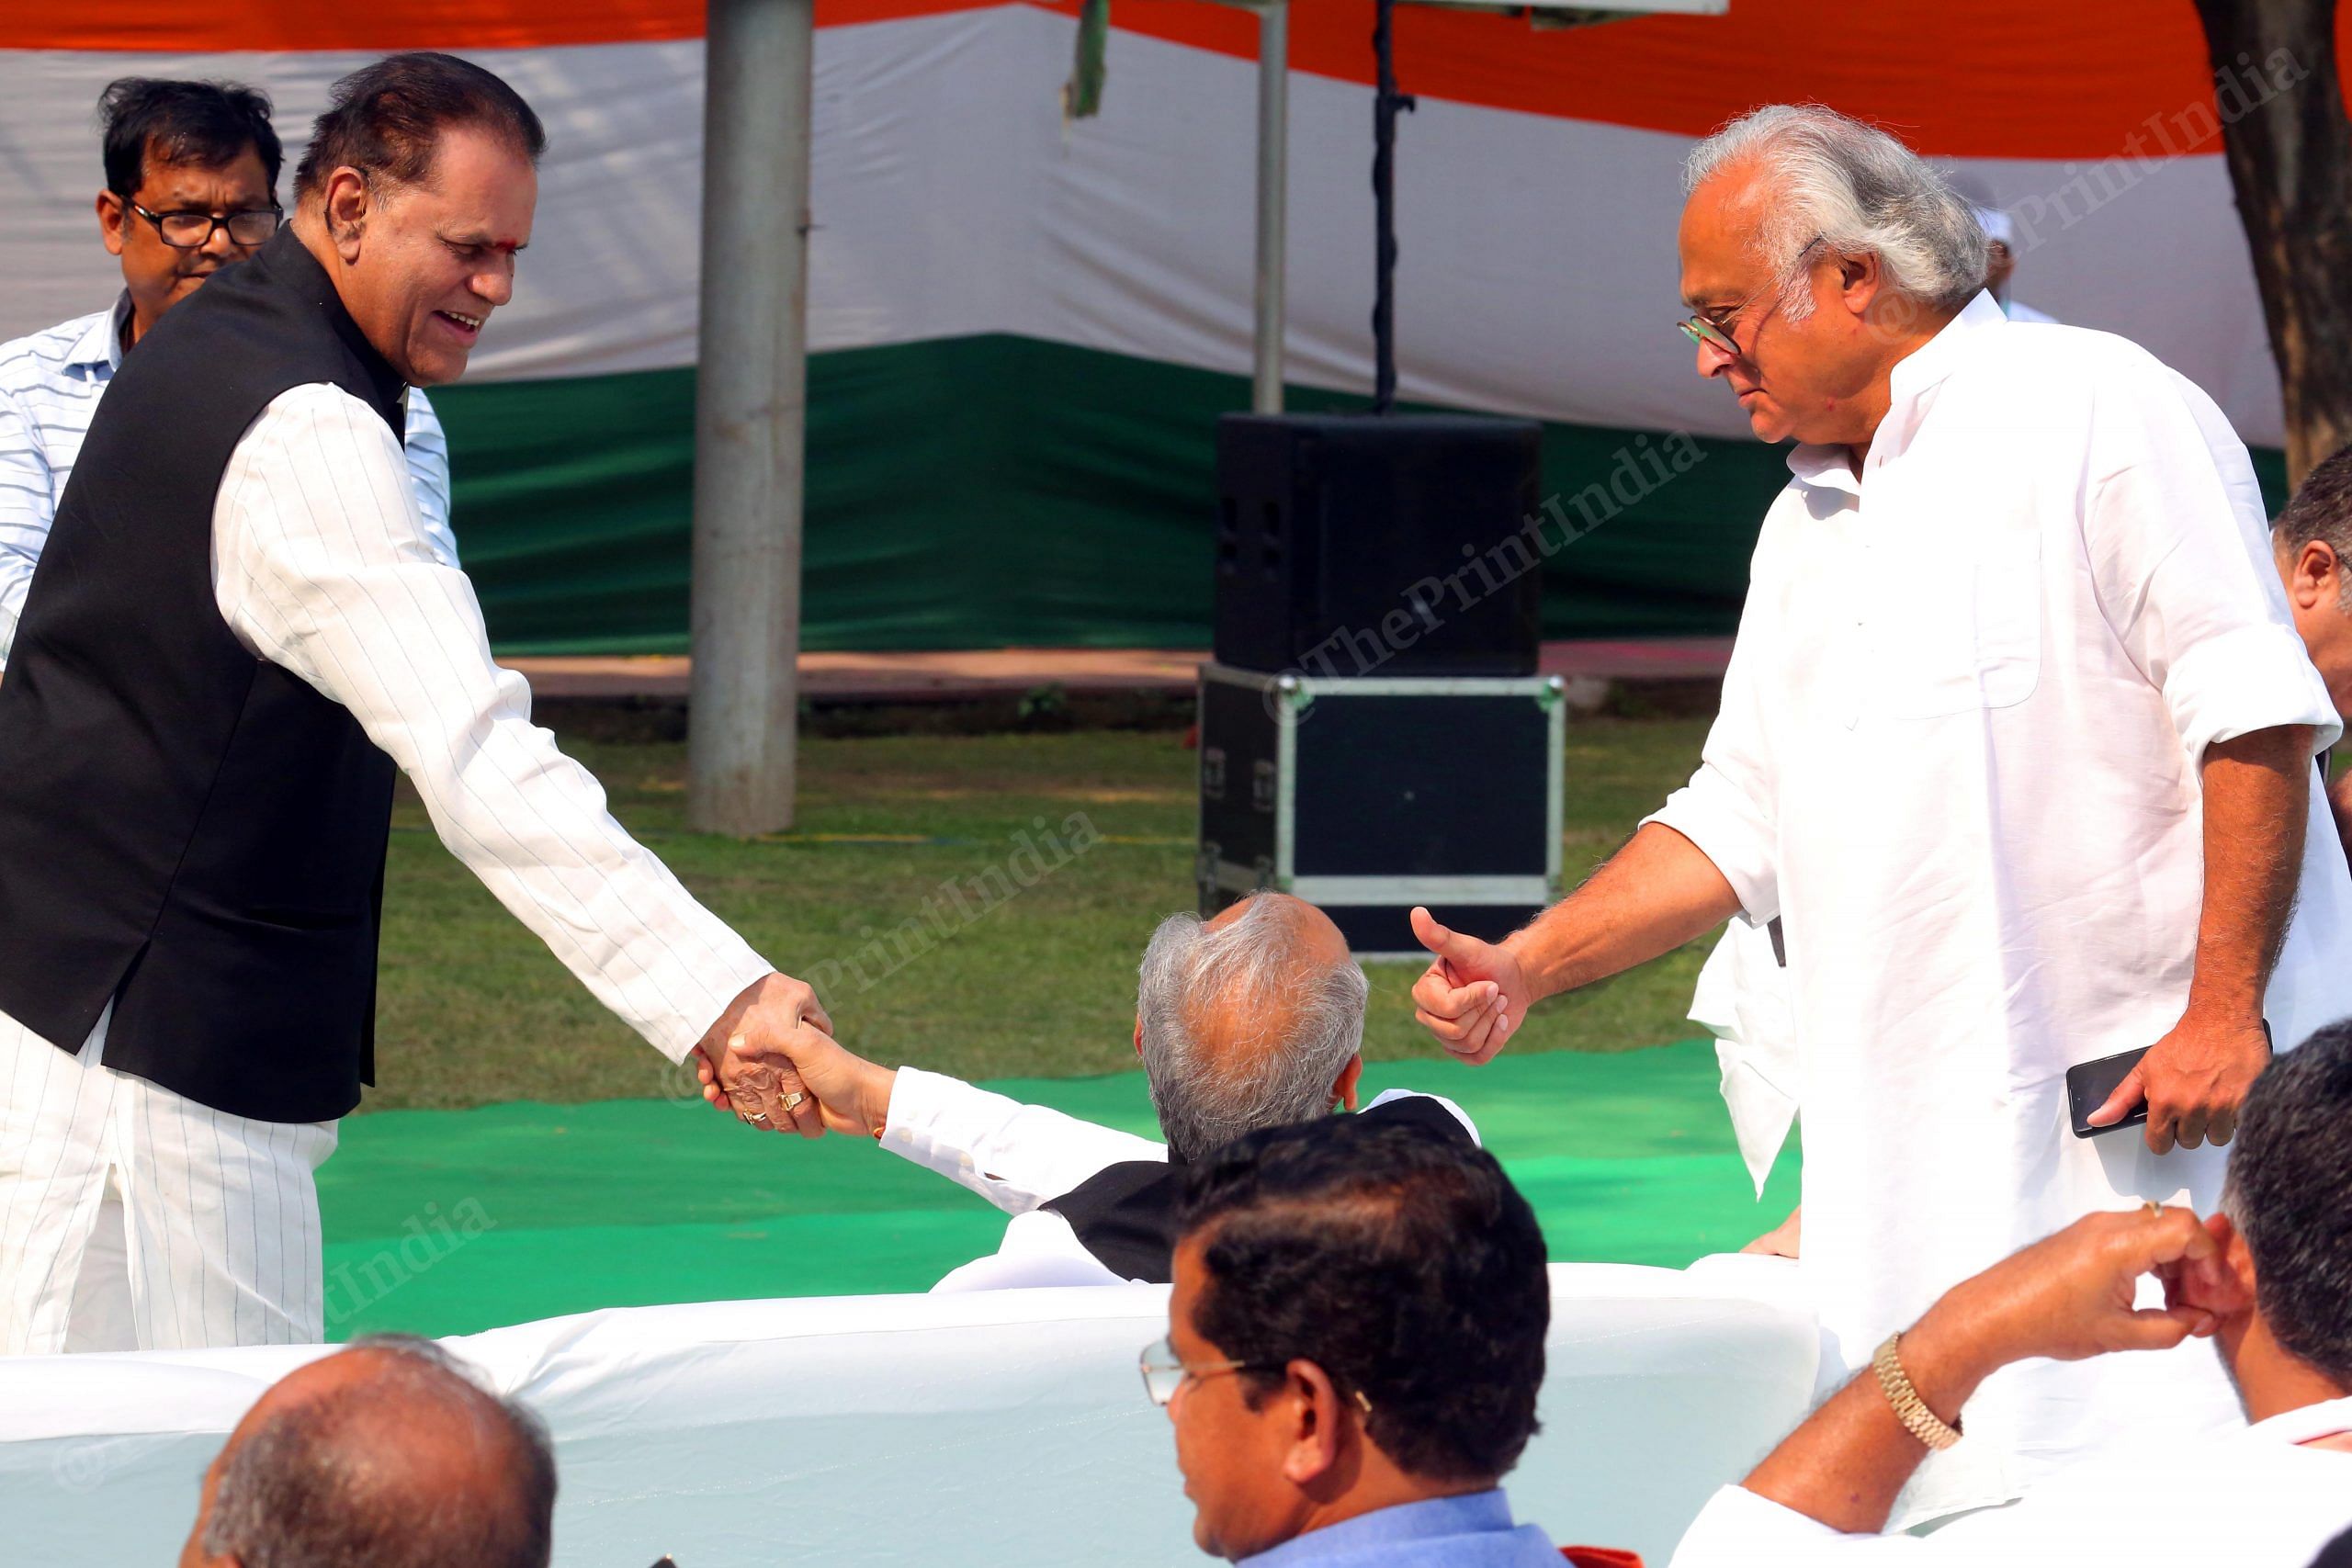 Congress Leader Jairam Ramesh shows thumb to Rajasthan CM Ashok Gehlot during the presentation of certificate of election to the newly elected Congress President | Praveen Jain | ThePrint